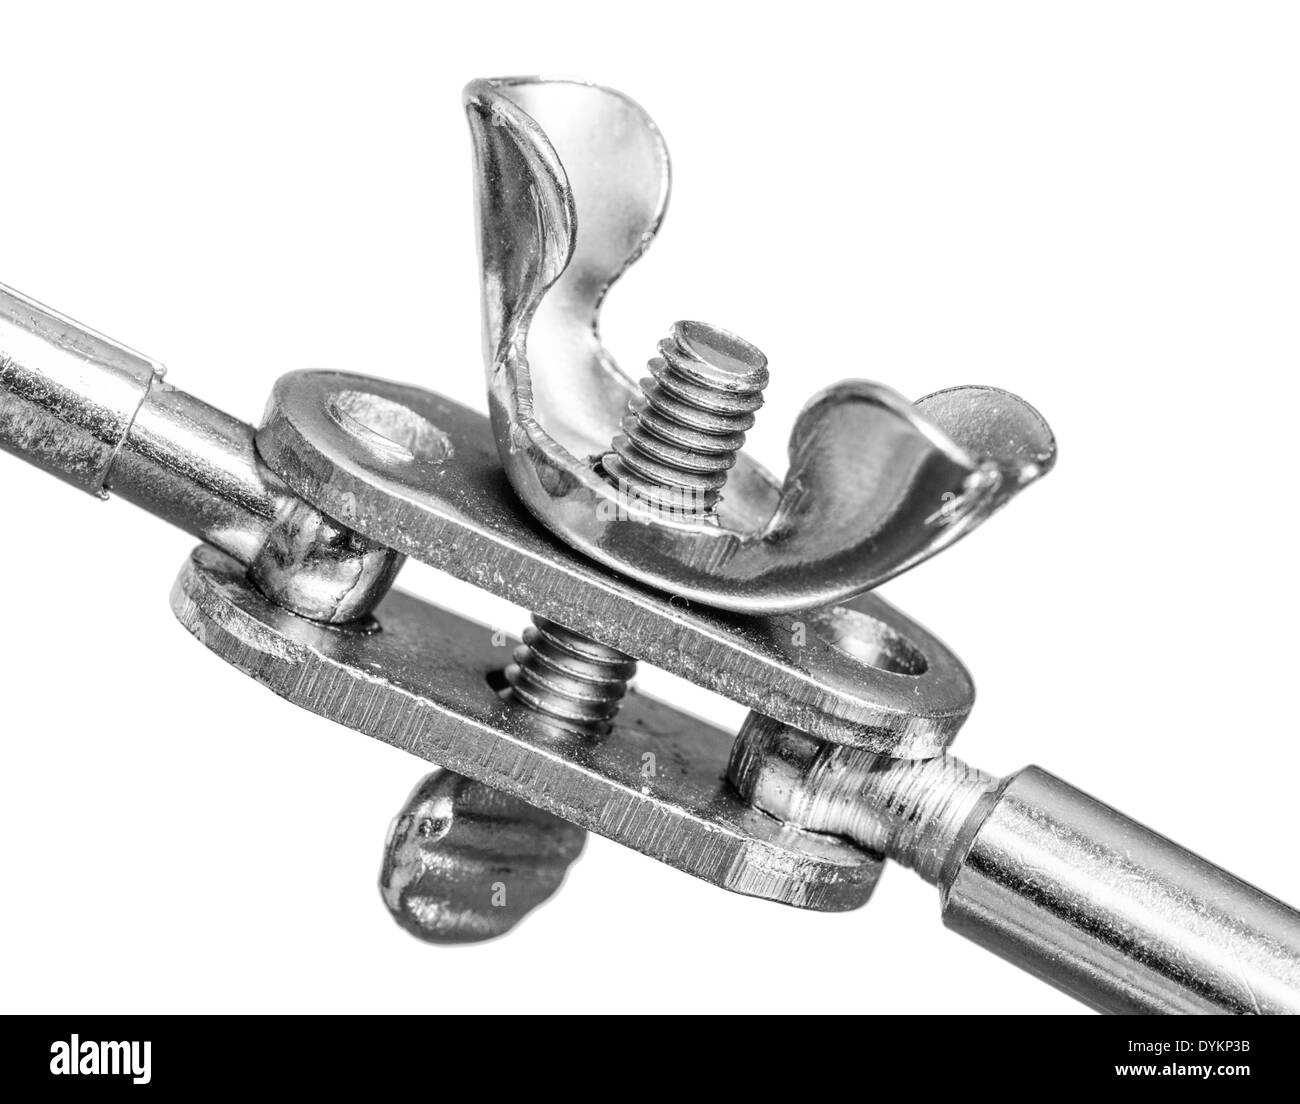 Closeup of a Wing nut or metallic clamp on a white background. Stock Photo